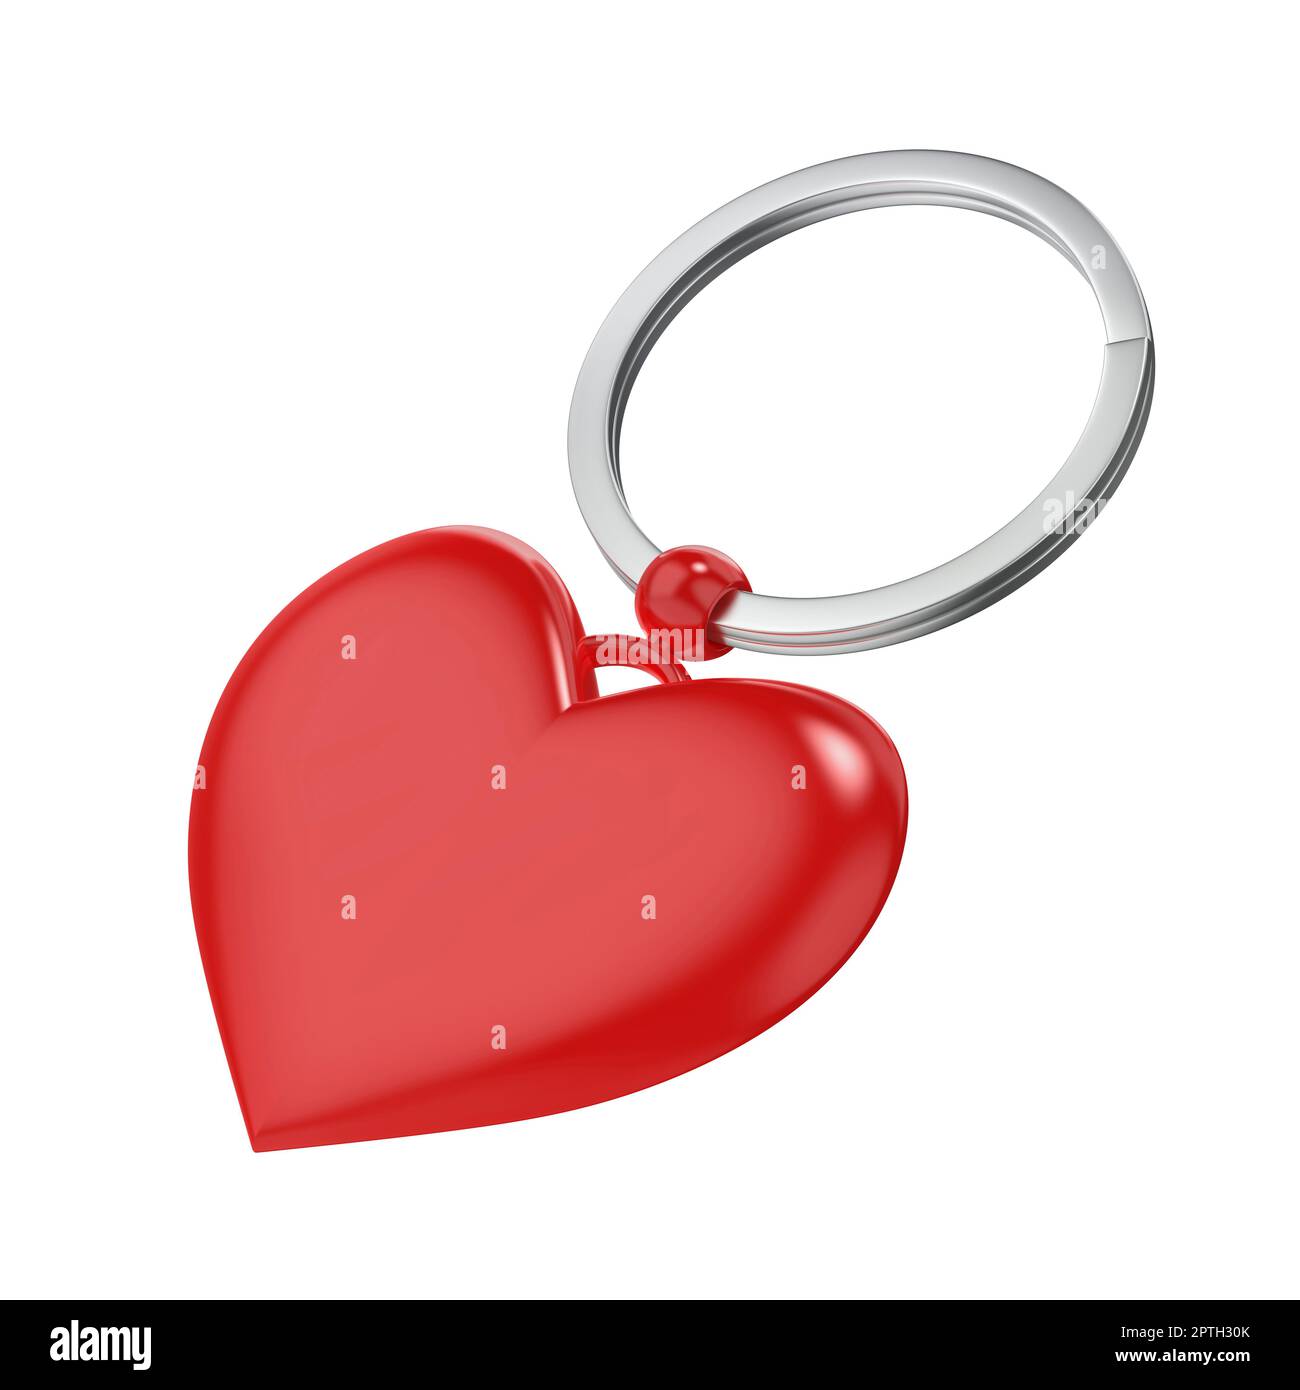 PATENT HEART KEYRING AND HEART CLIP